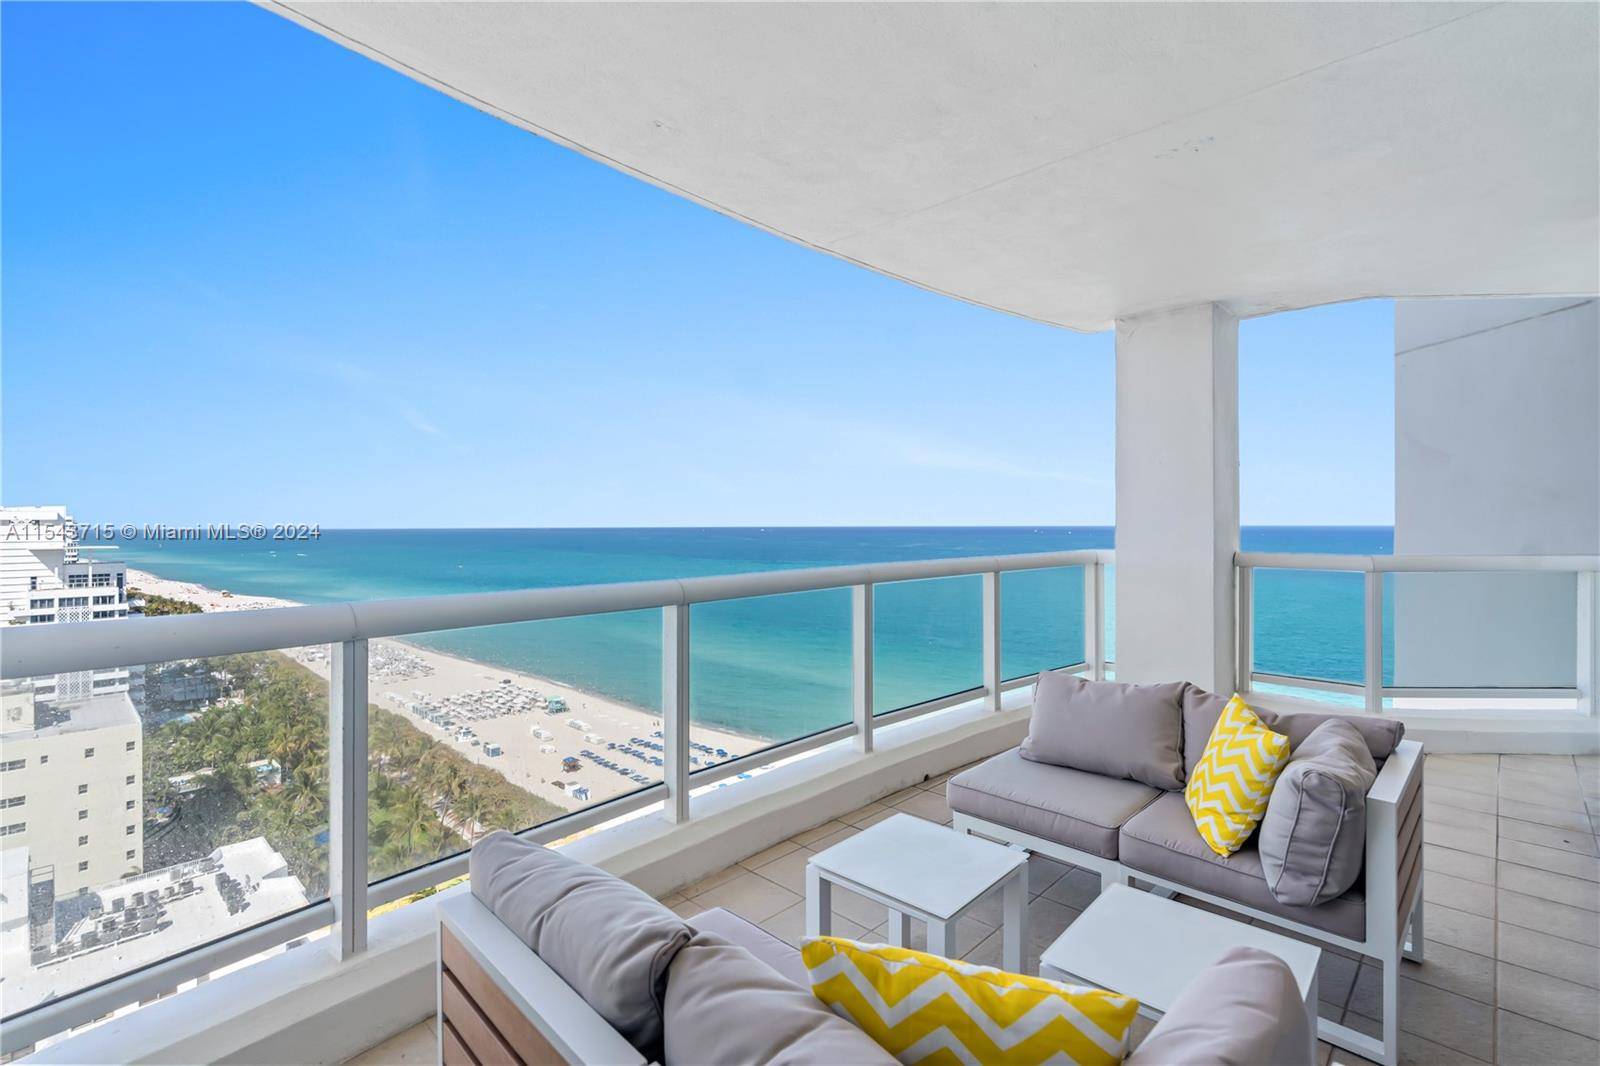 Enter a beautiful 2BD 2BA furnished corner apartment with breathtaking ocean, city, and intracoastal views.